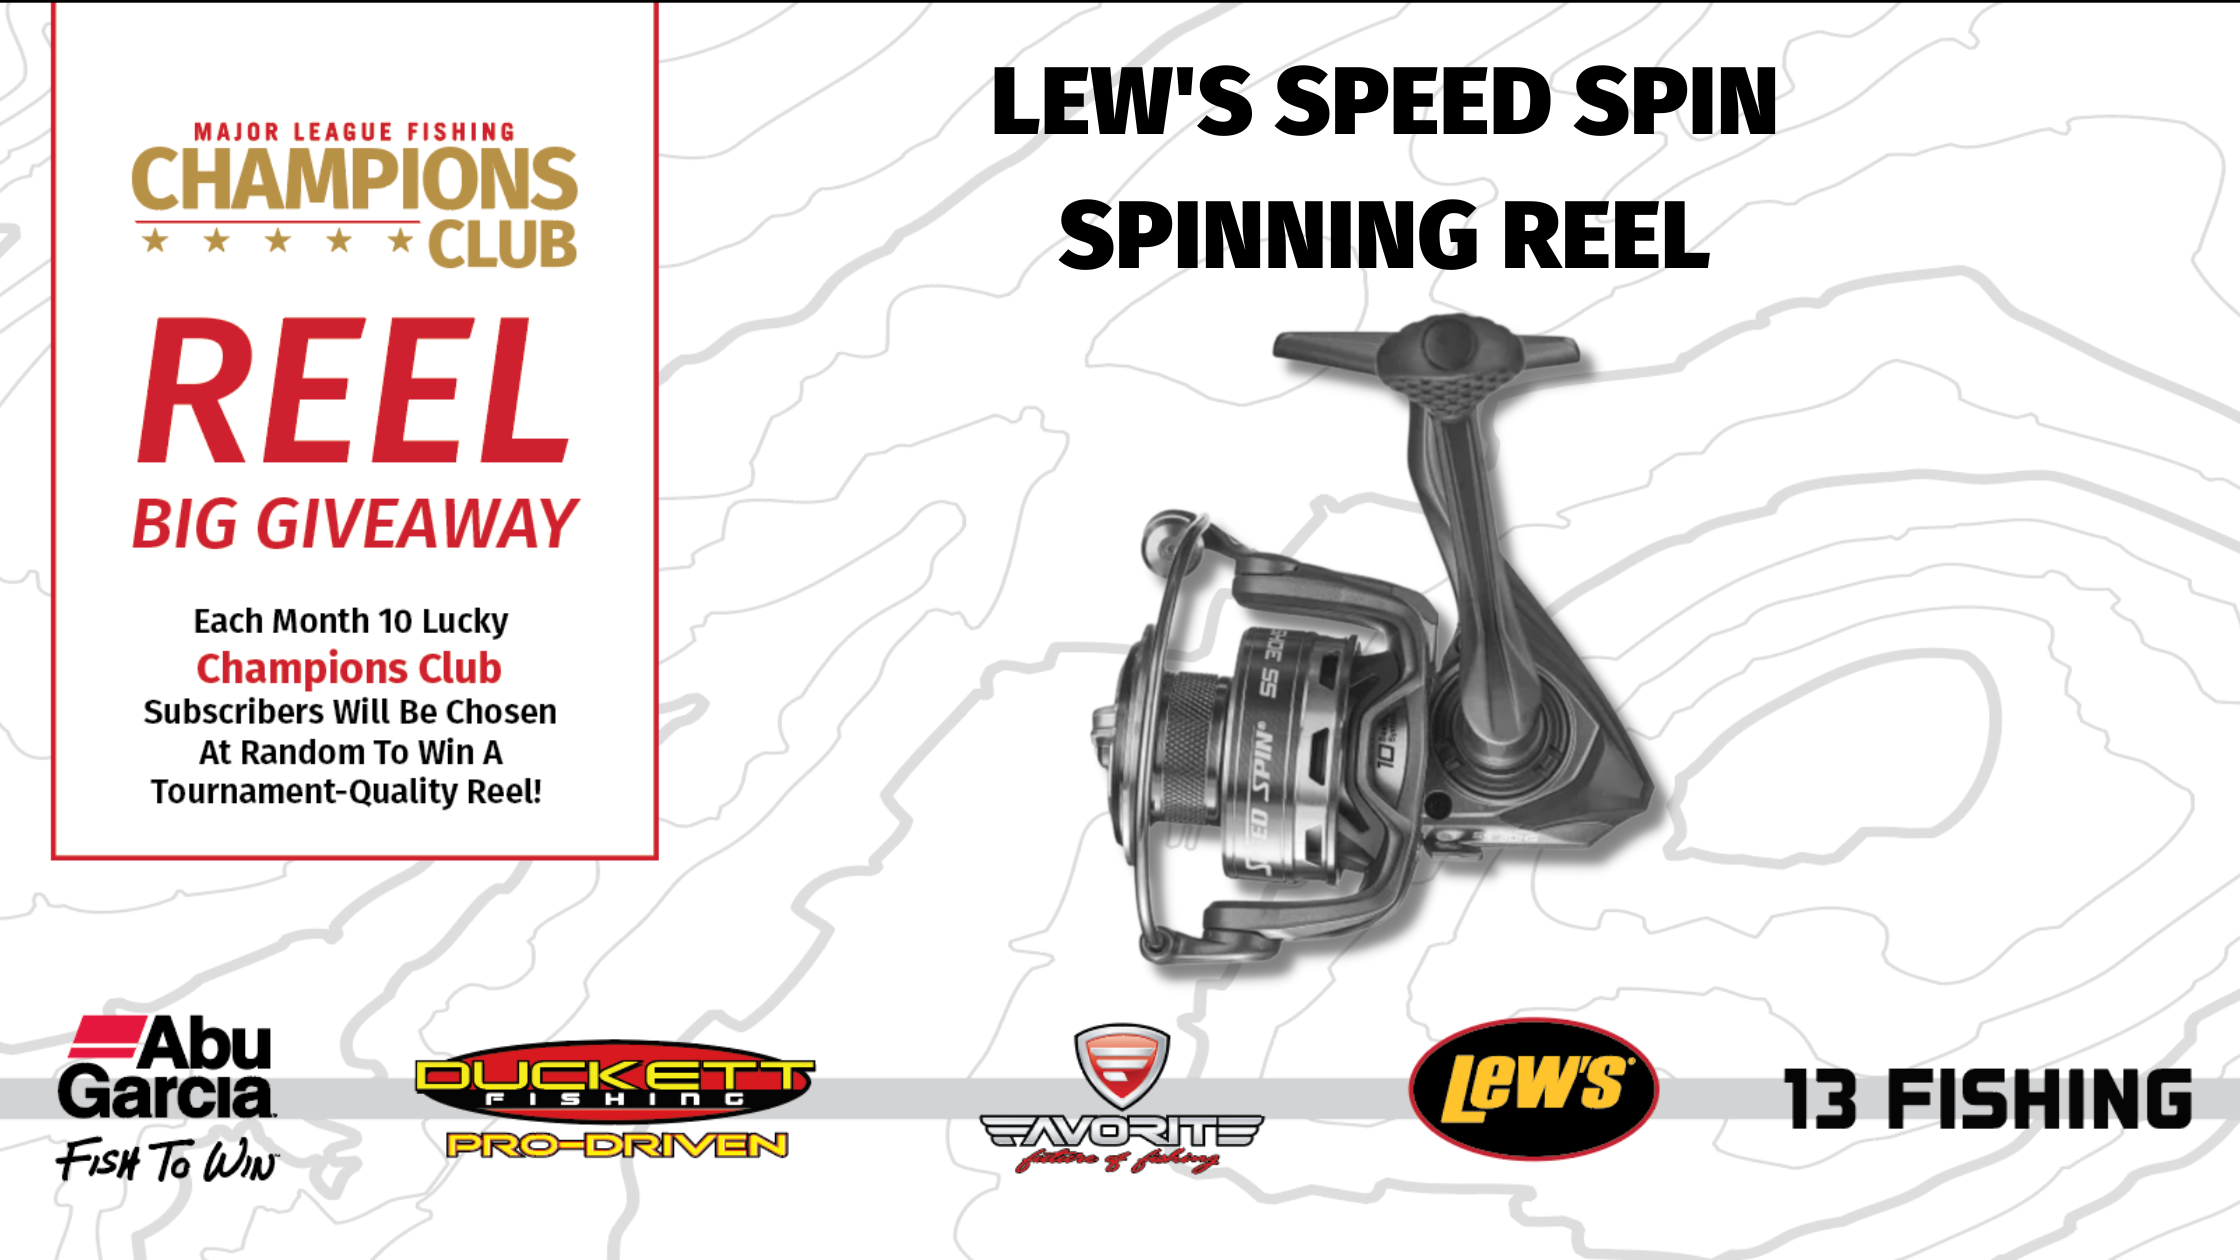 Featured Reel: Lew's Speed Spin Spinning Reel - Major League Fishing